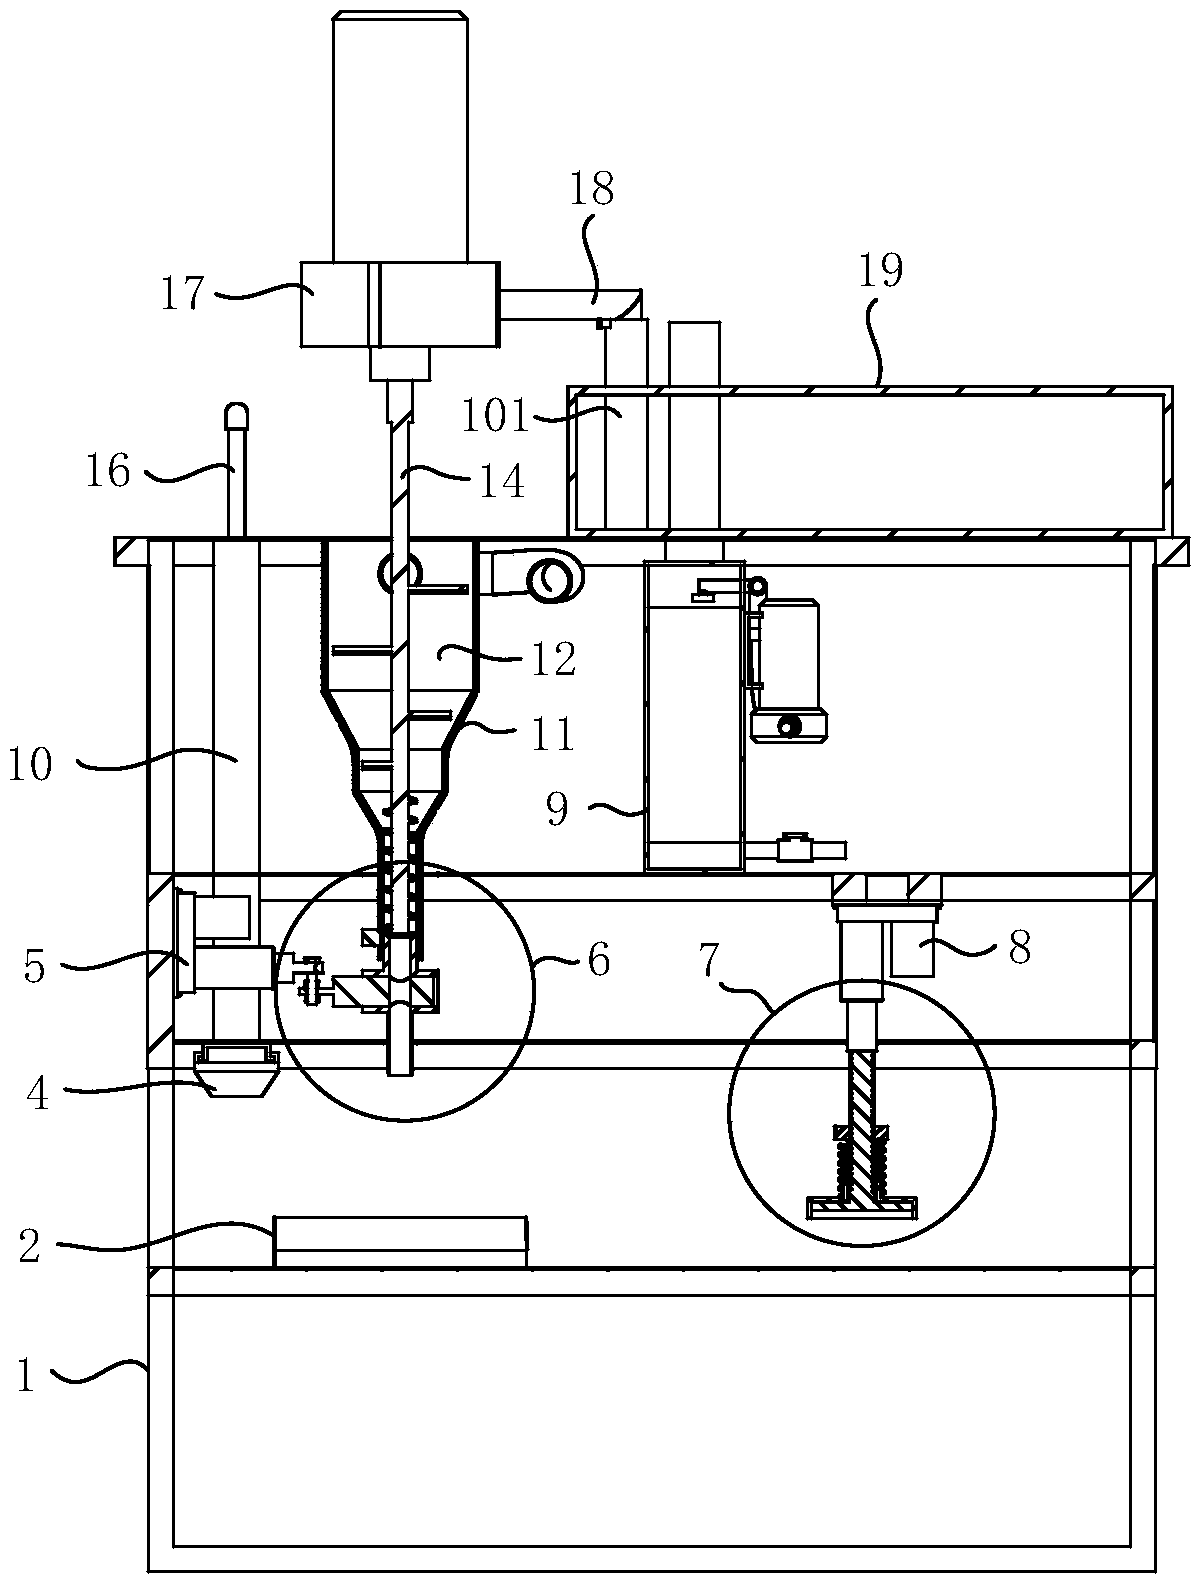 Plaster automatic forming apparatus